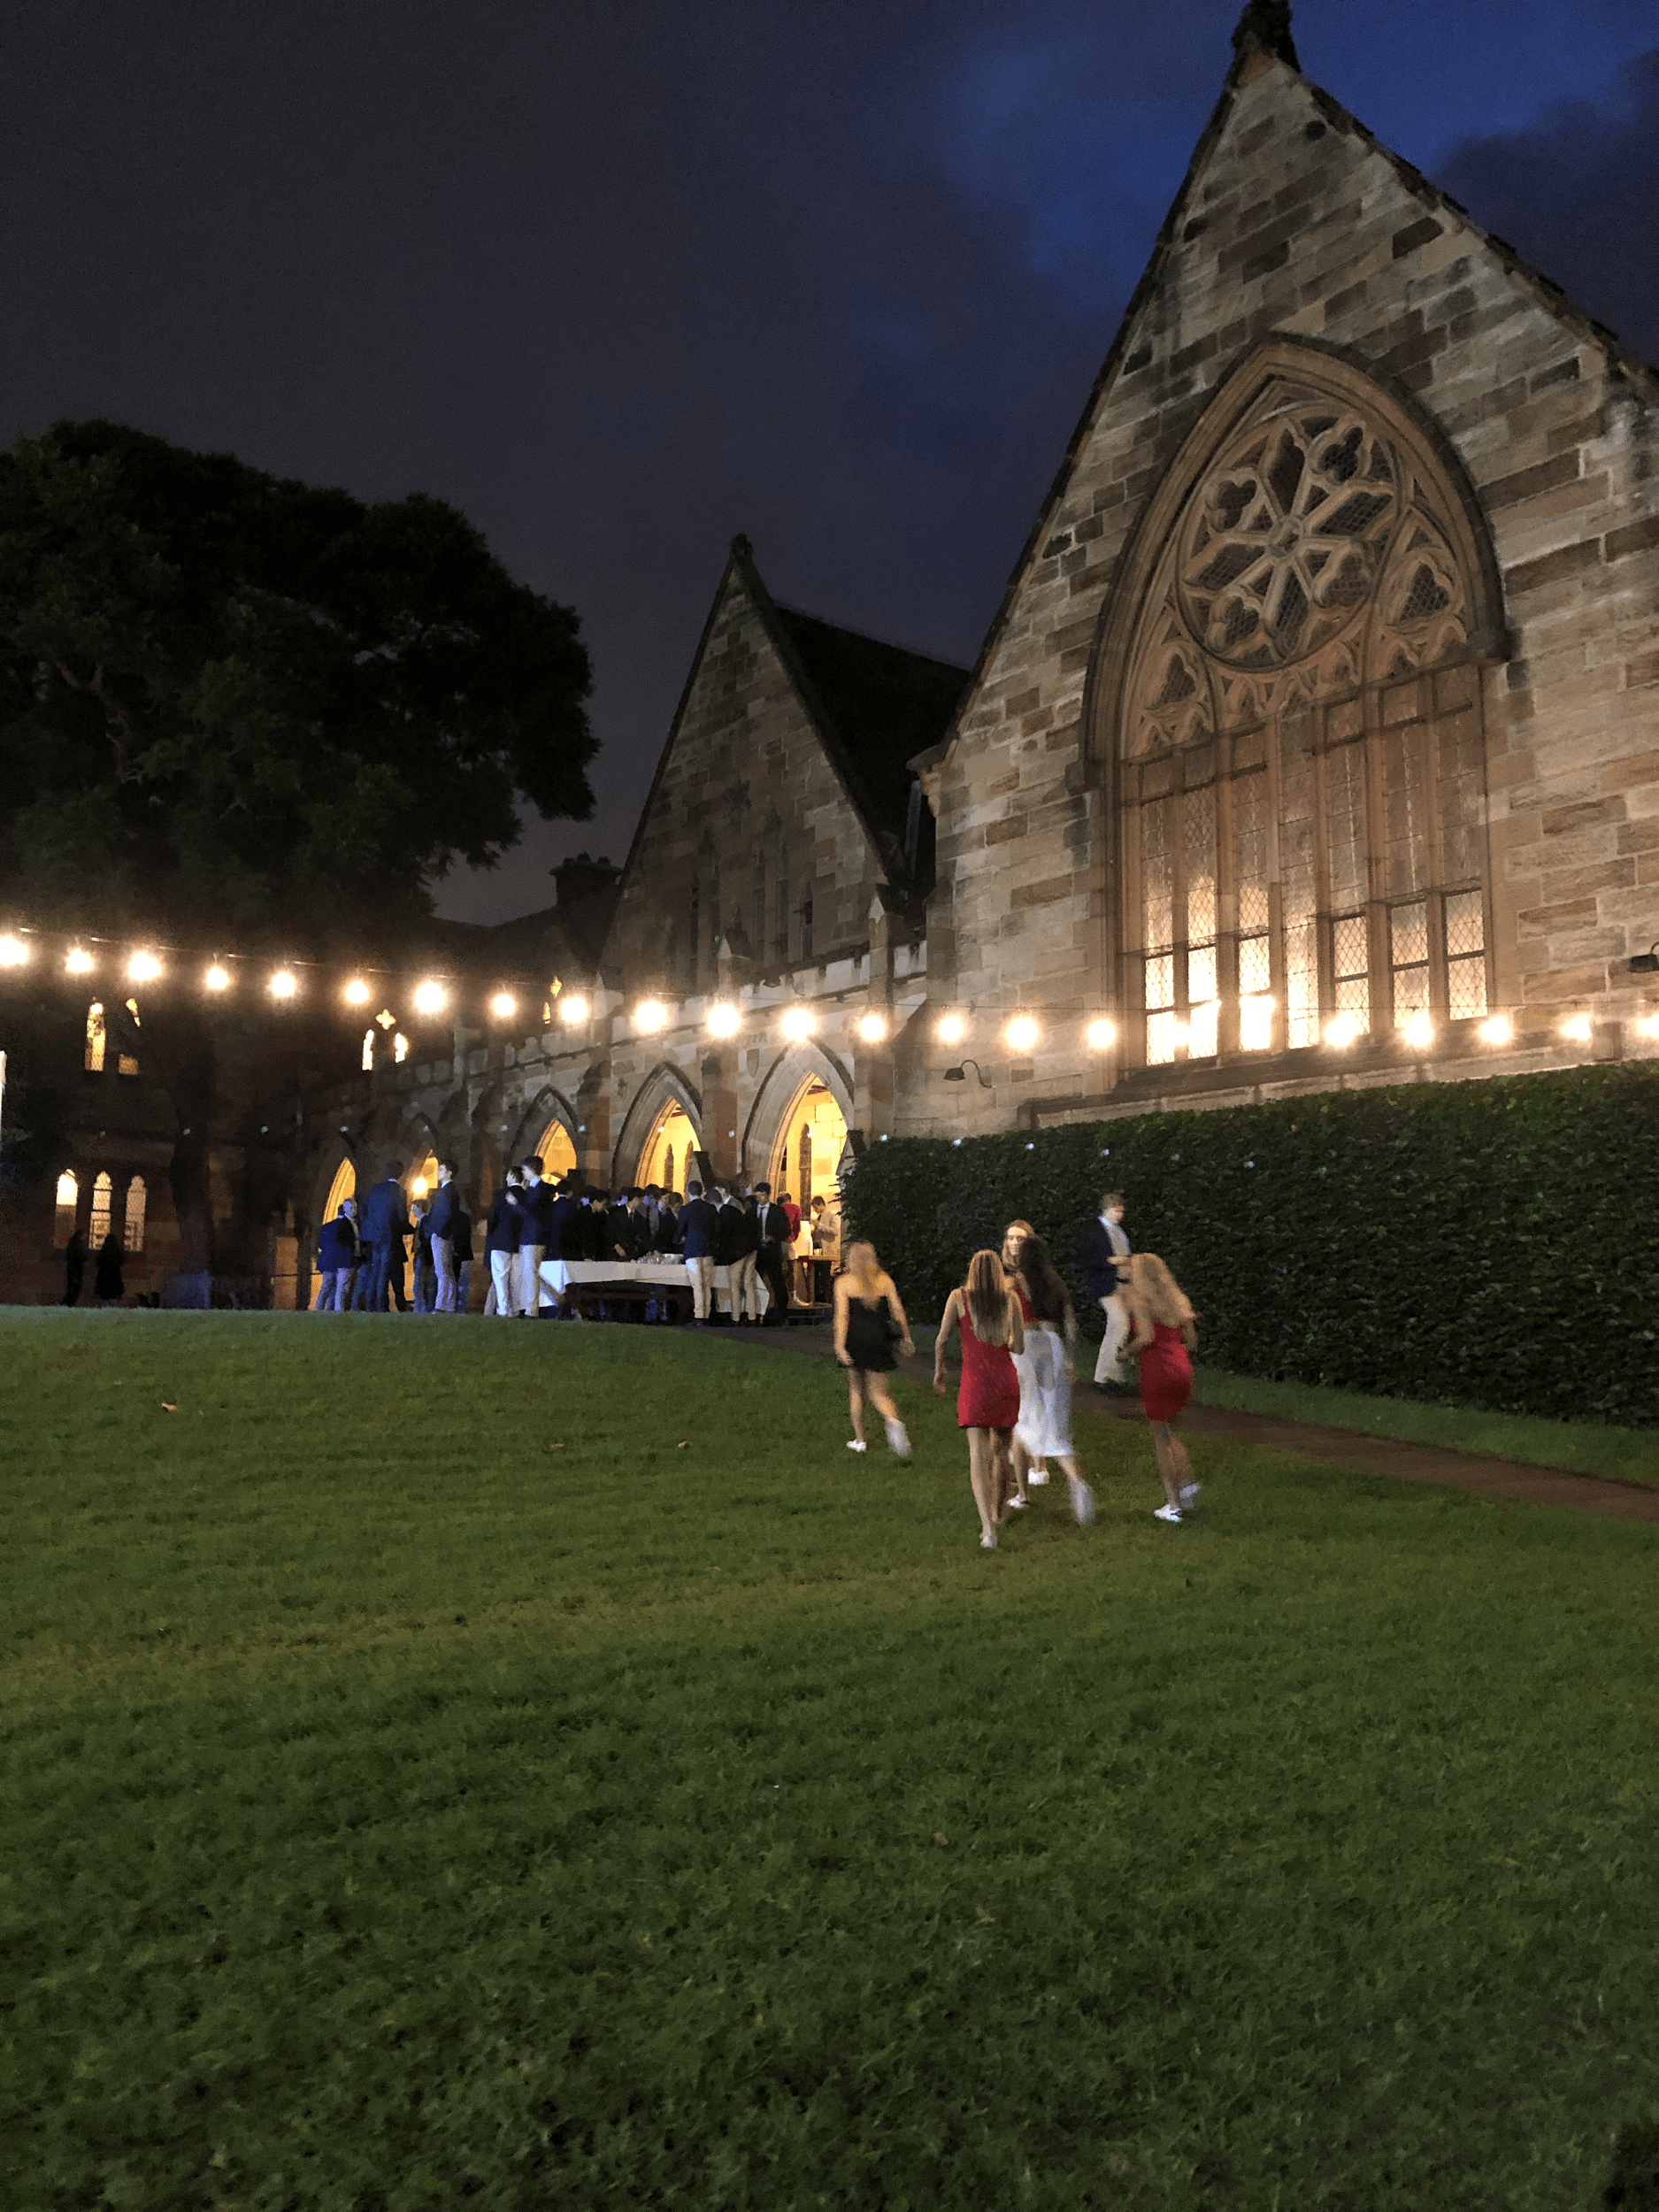 Old college building at night with string lights outside and students dressed up